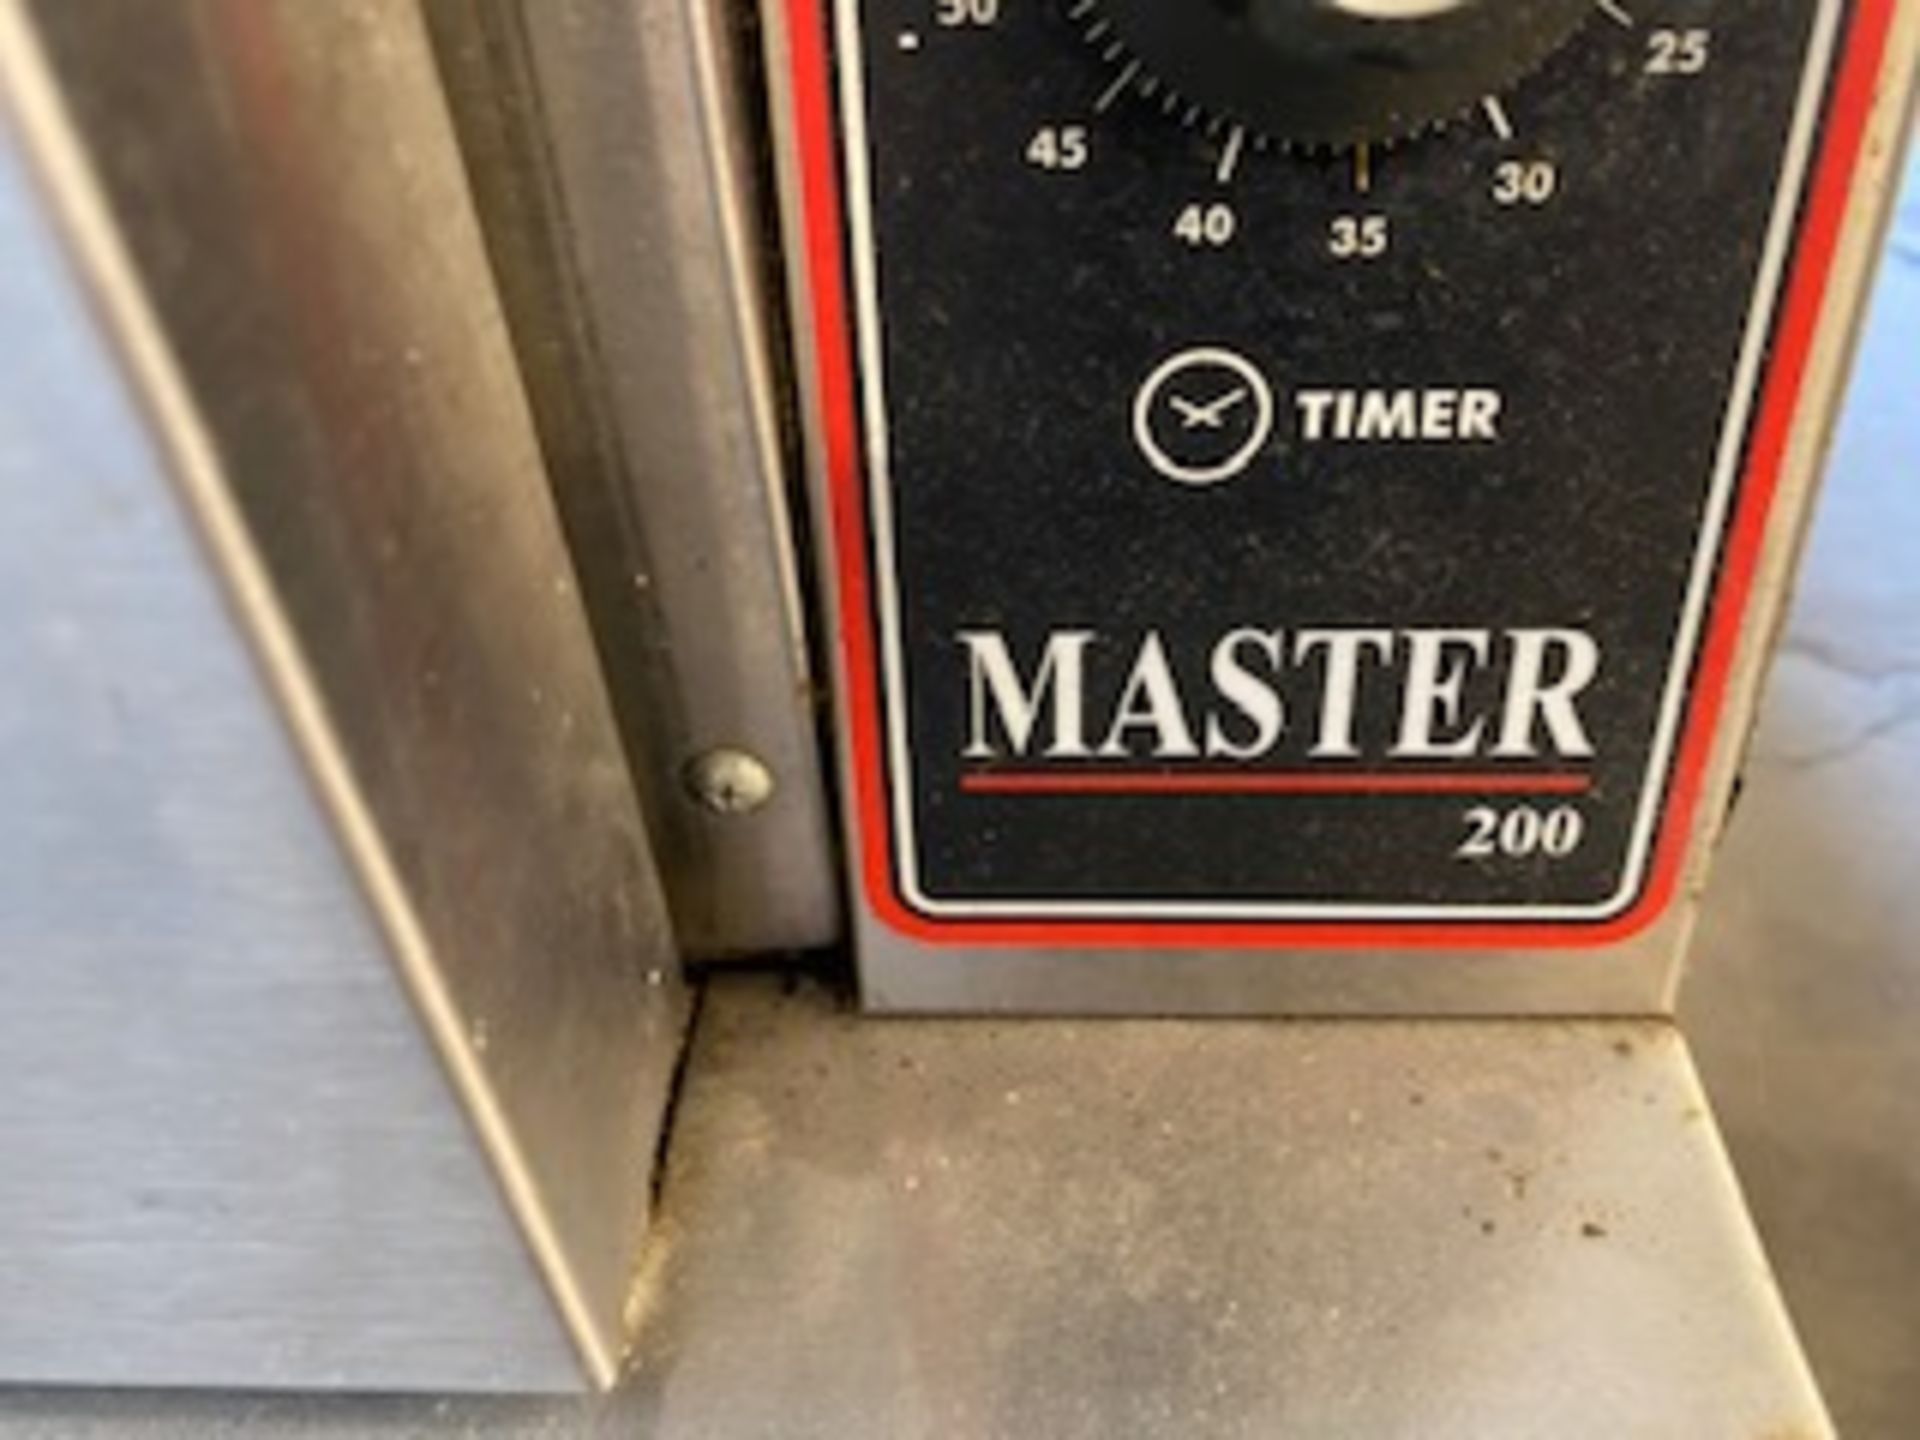 Garland master 200 oven in single or 3 ph, currently set up for 3 phase - Image 2 of 4